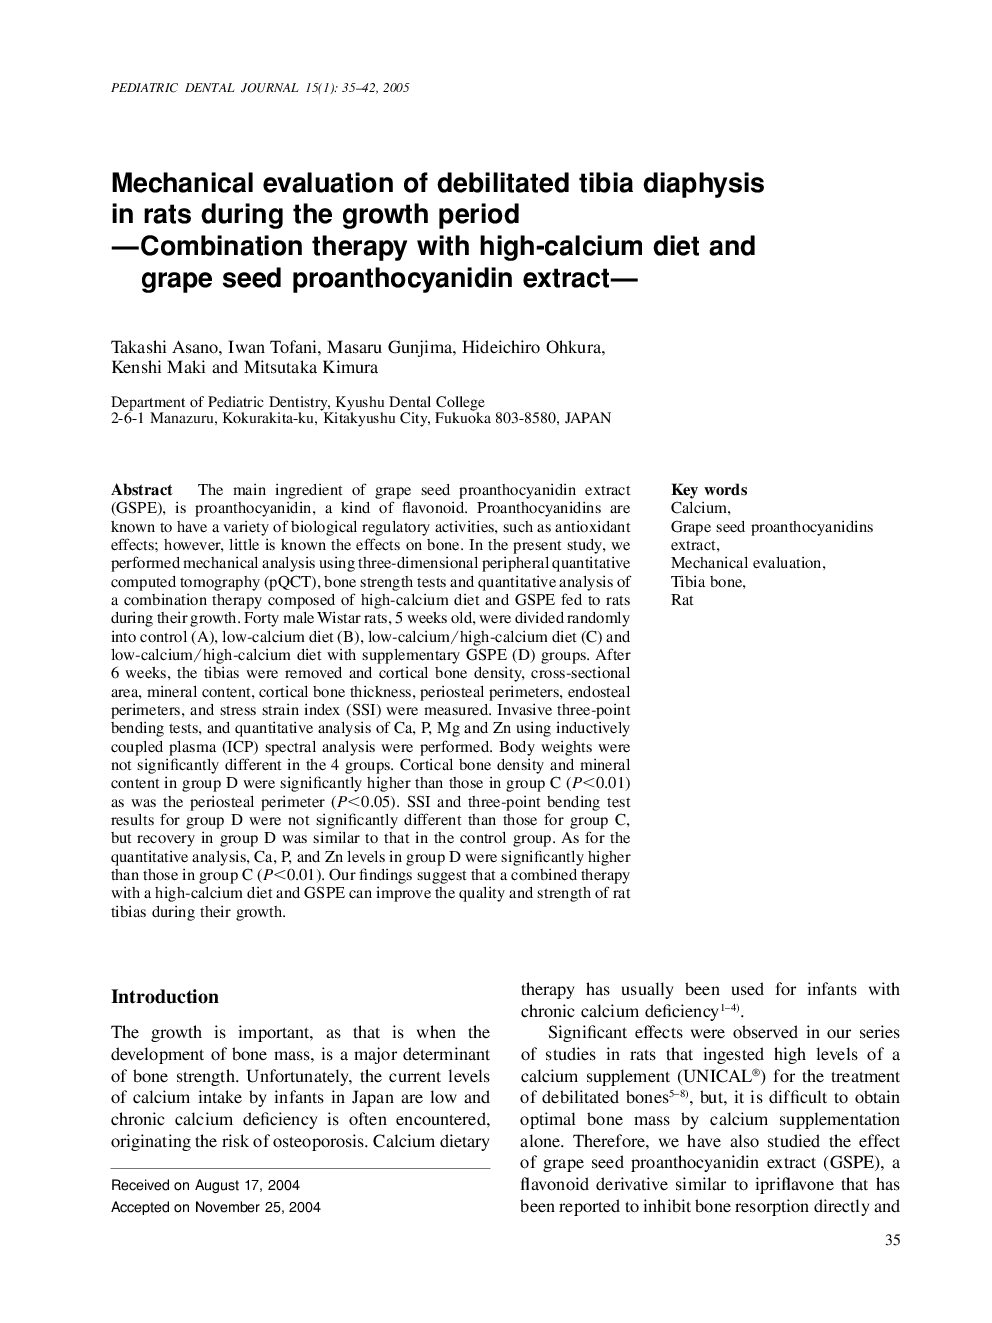 Mechanical evaluation of debilitated tibia diaphysis in rats during the growth period -Combination therapy with high-calcium diet and grape seed proanthocyanidin extract-